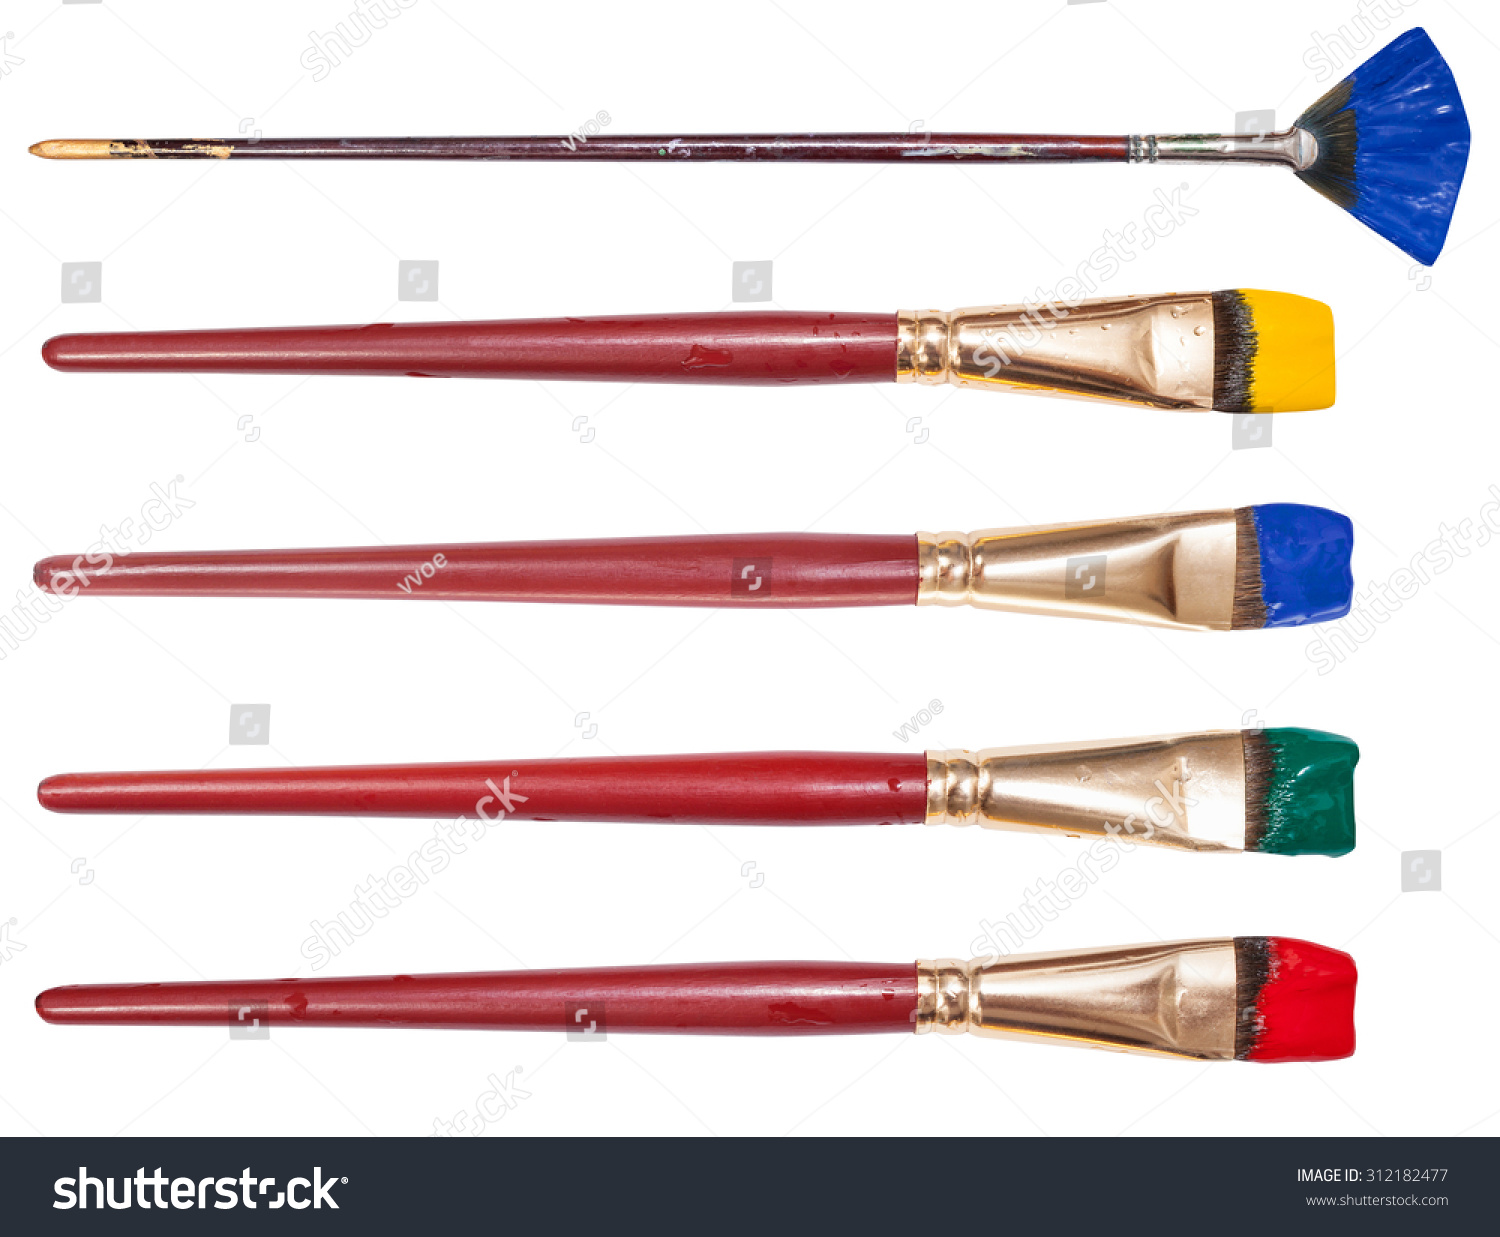 set of flat artistic paintbrushes with painted tips isolated on white background #312182477